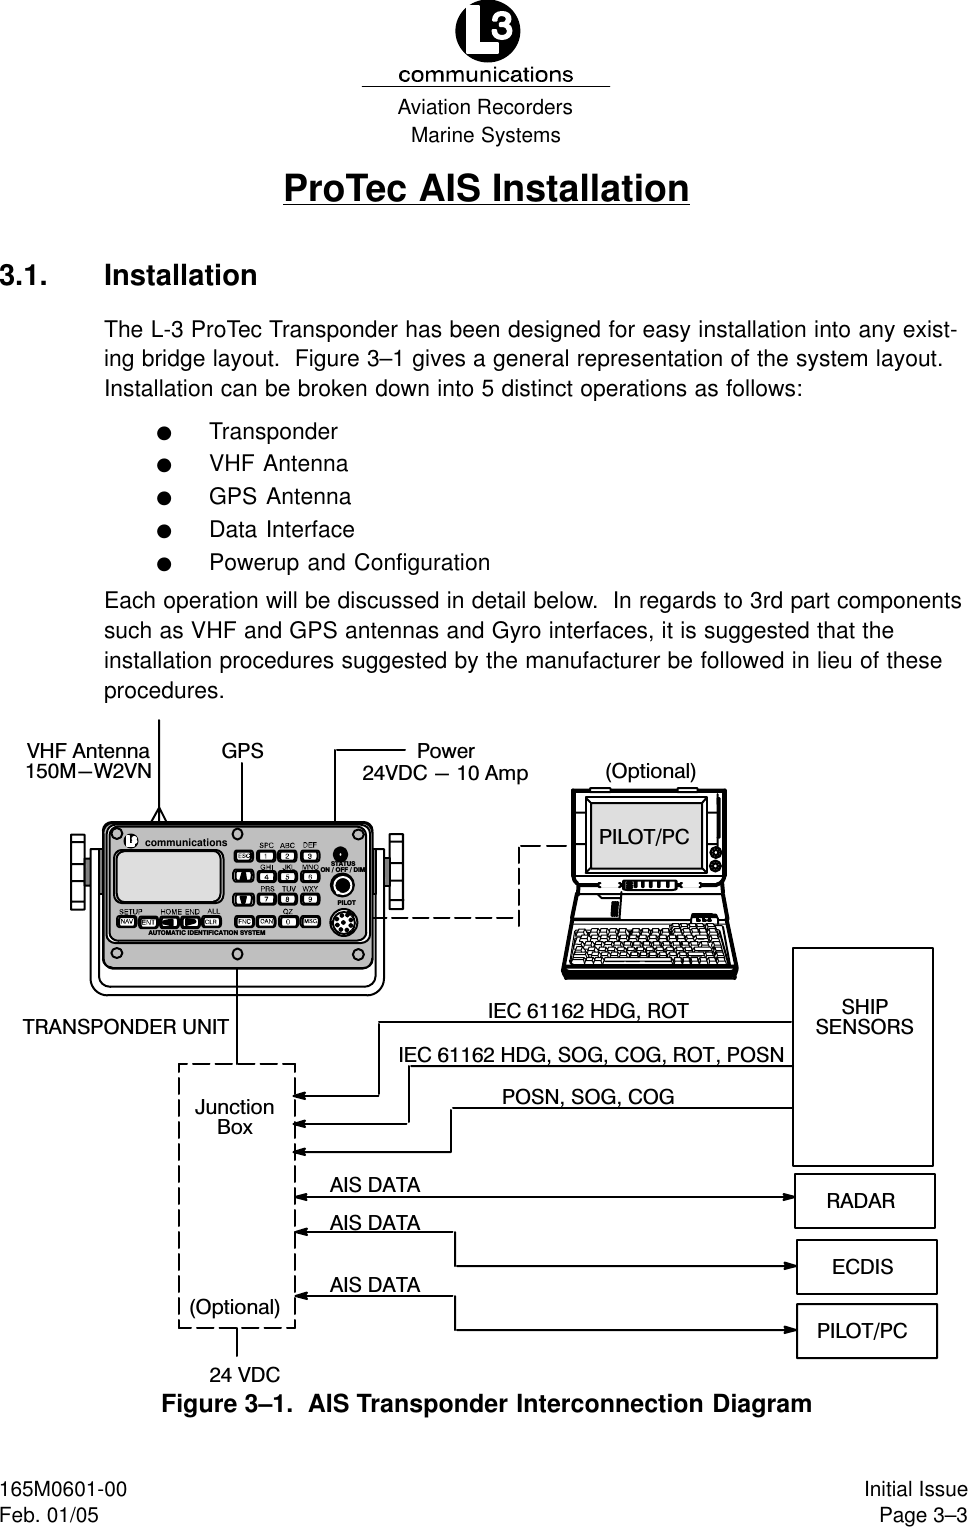 Marine SystemsAviation RecordersPage 3–3Initial Issue165M0601-00Feb. 01/05ProTec AIS Installation3.1. InstallationThe L-3 ProTec Transponder has been designed for easy installation into any exist-ing bridge layout.  Figure 3–1 gives a general representation of the system layout.Installation can be broken down into 5 distinct operations as follows:FTransponderFVHF AntennaFGPS AntennaFData InterfaceFPowerup and ConfigurationEach operation will be discussed in detail below.  In regards to 3rd part componentssuch as VHF and GPS antennas and Gyro interfaces, it is suggested that the installation procedures suggested by the manufacturer be followed in lieu of these procedures.JunctionBoxIEC 61162 HDG, ROTTRANSPONDER UNITIEC 61162 HDG, SOG, COG, ROT, POSNPOSN, SOG, COGSHIPSENSORS(Optional)RADARECDISPILOT/PCAIS DATAAIS DATAAIS DATAVHF Antenna150M-W2VNGPS24VDC - 10 AmpPowerPILOT/PC24 VDC(Optional)communicationsPILOTAUTOMATIC IDENTIFICATION SYSTEMSTATUSON / OFF / DIMFigure 3–1.  AIS Transponder Interconnection Diagram